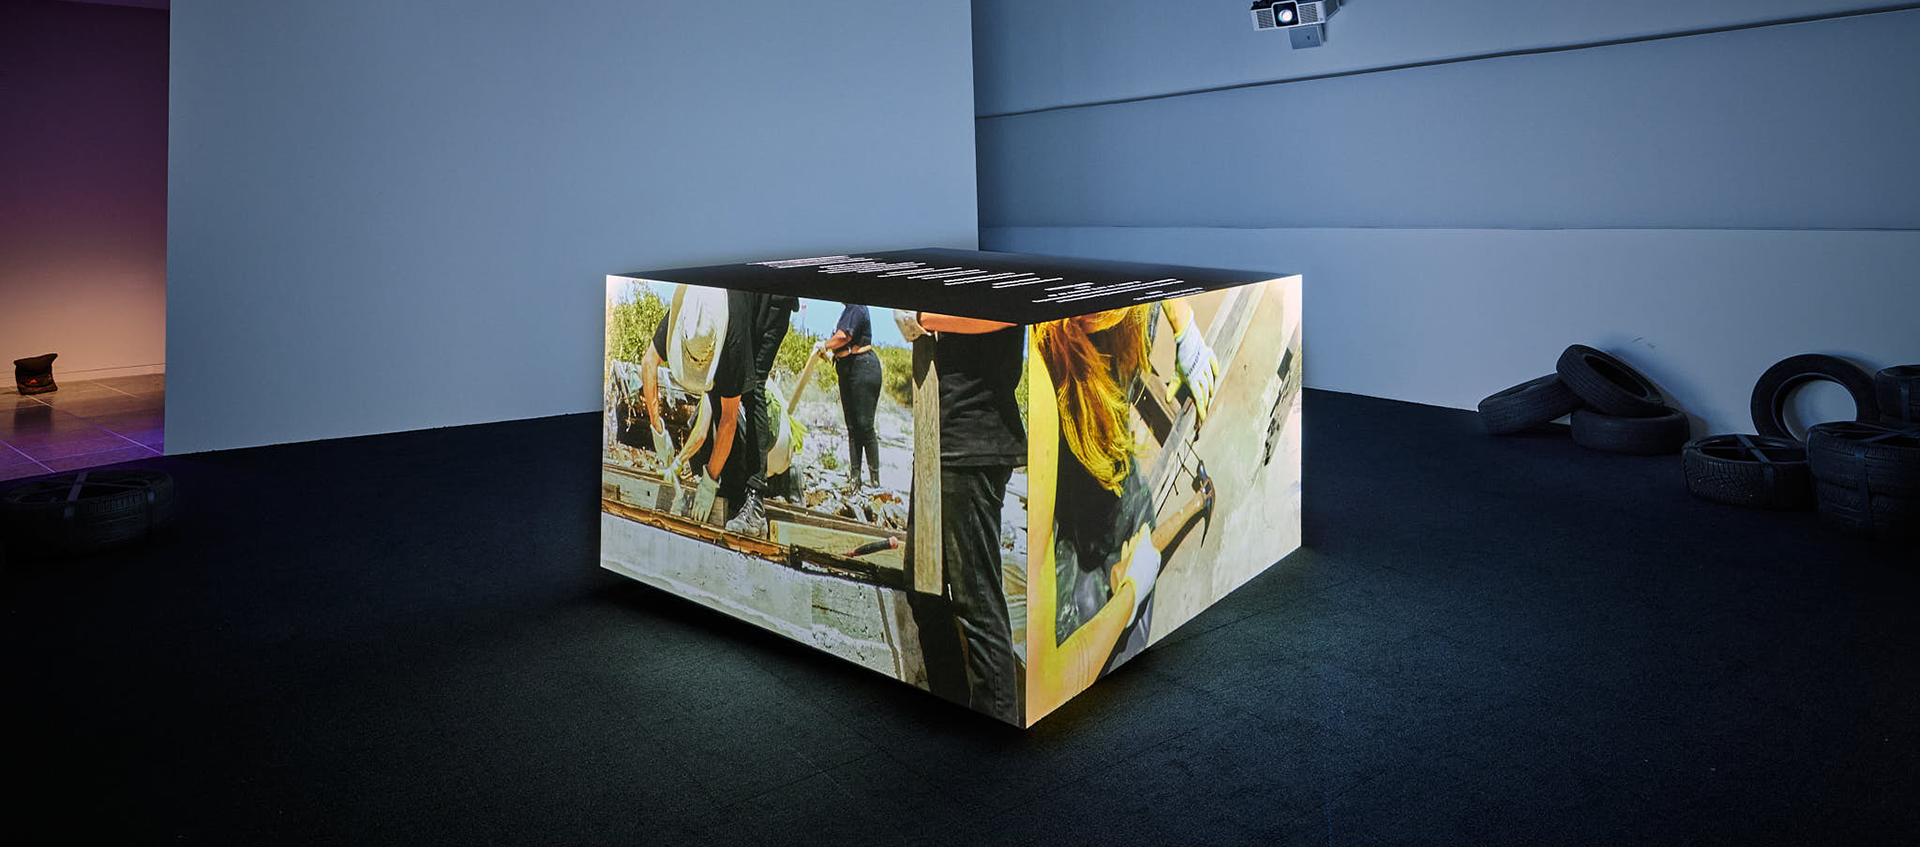 A cube in the center of a dimly lit gallery space casts video projections. There are tires placed on the floor to the right.